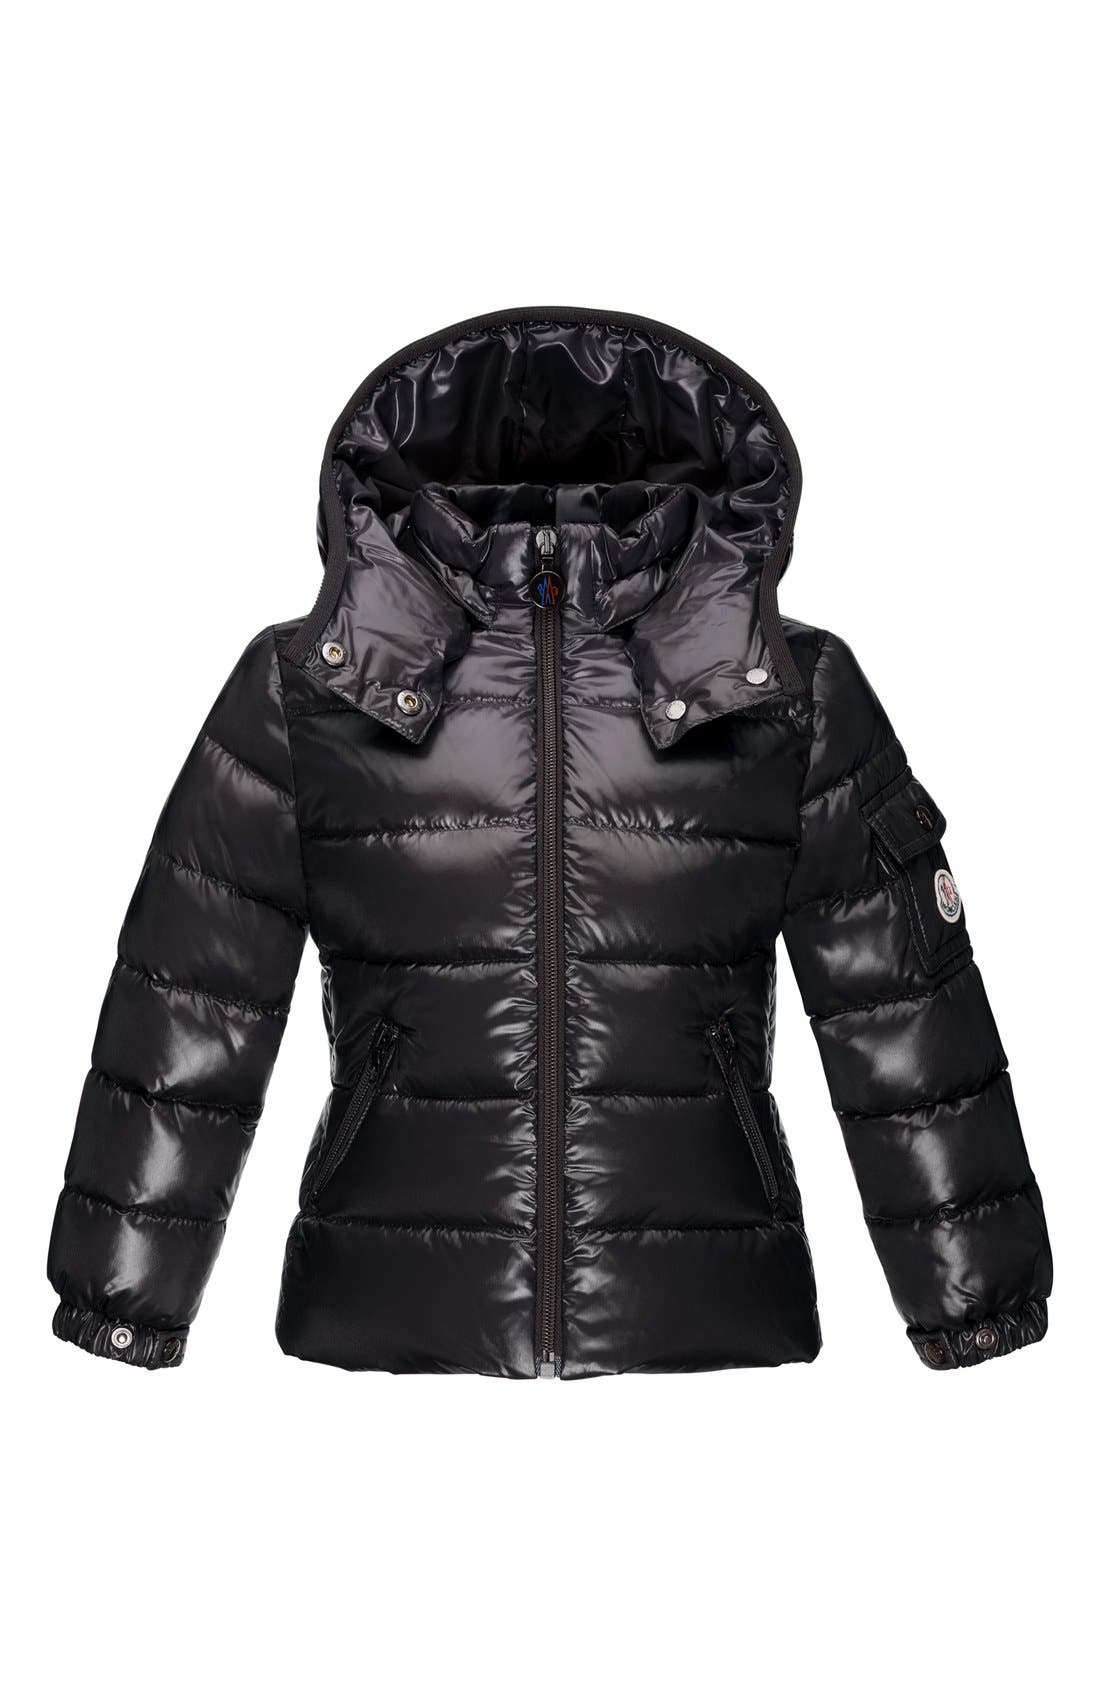 Moncler 'Bady' Down Puffer Jacket 